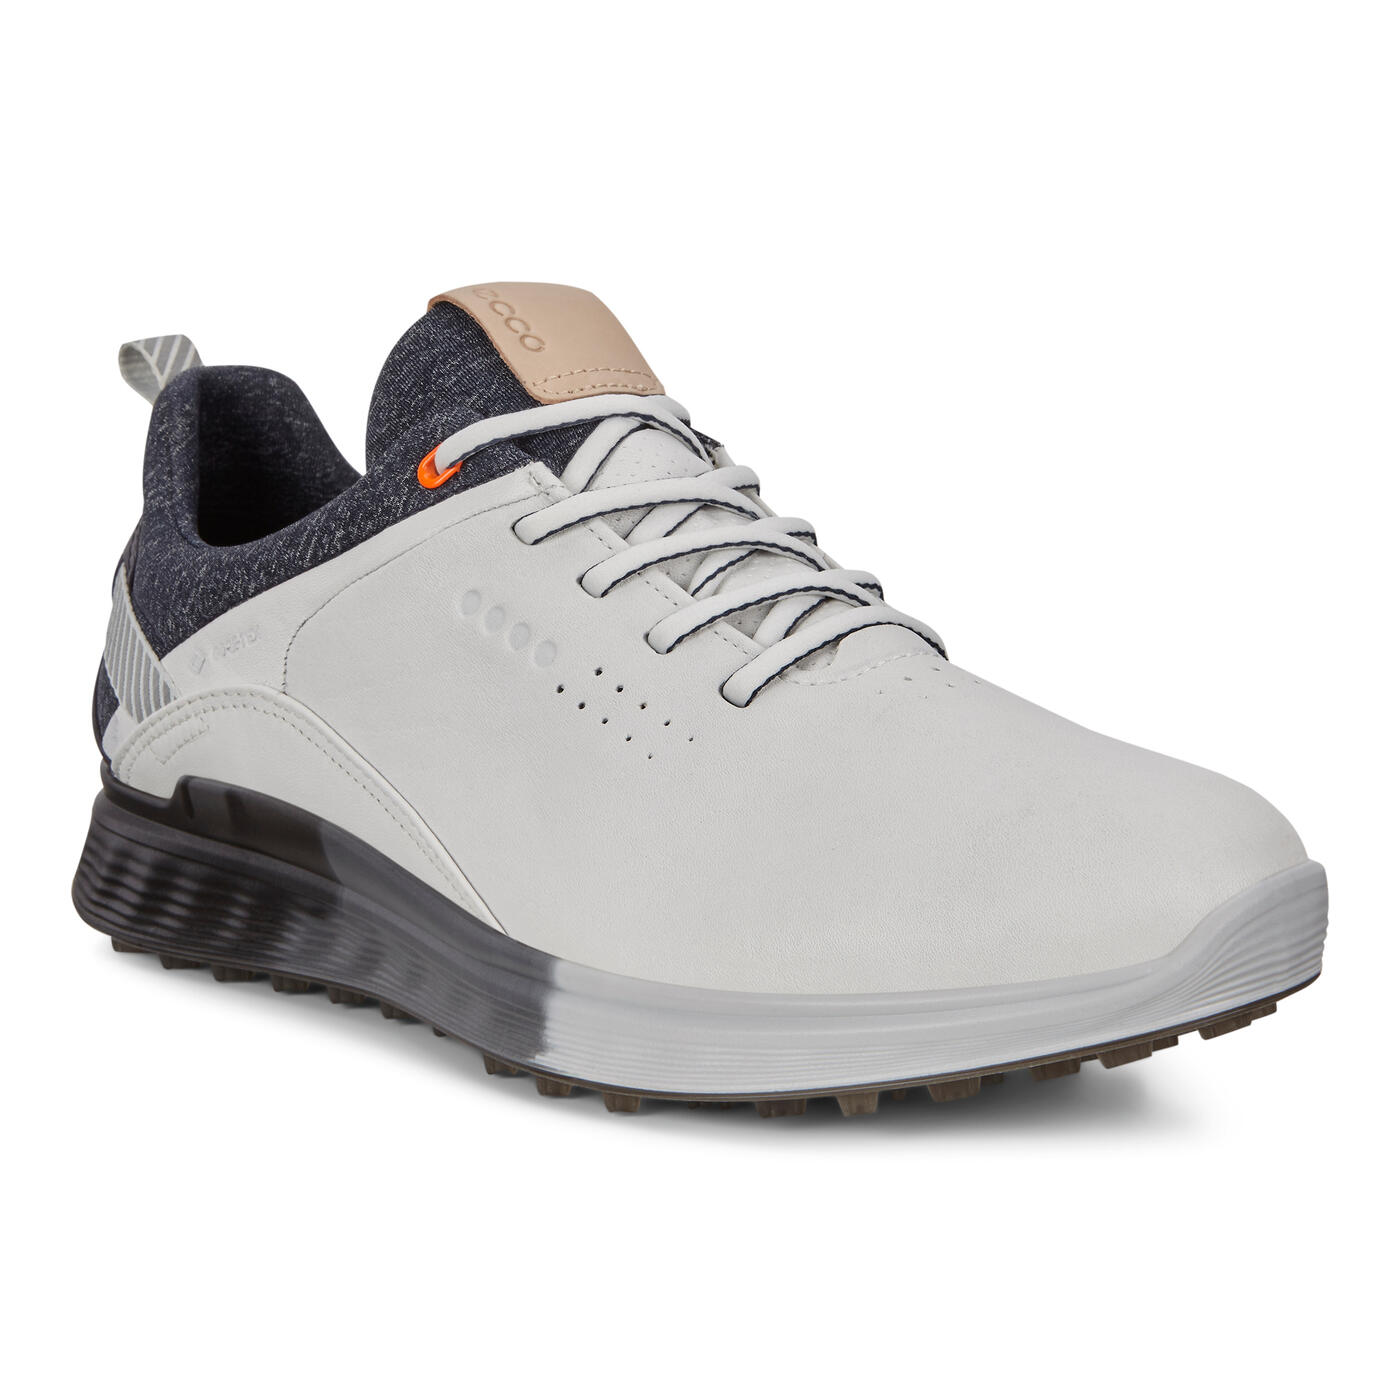 Men's S-Three Hybrid Golf Shoes | Order Today | ECCO® Shoes